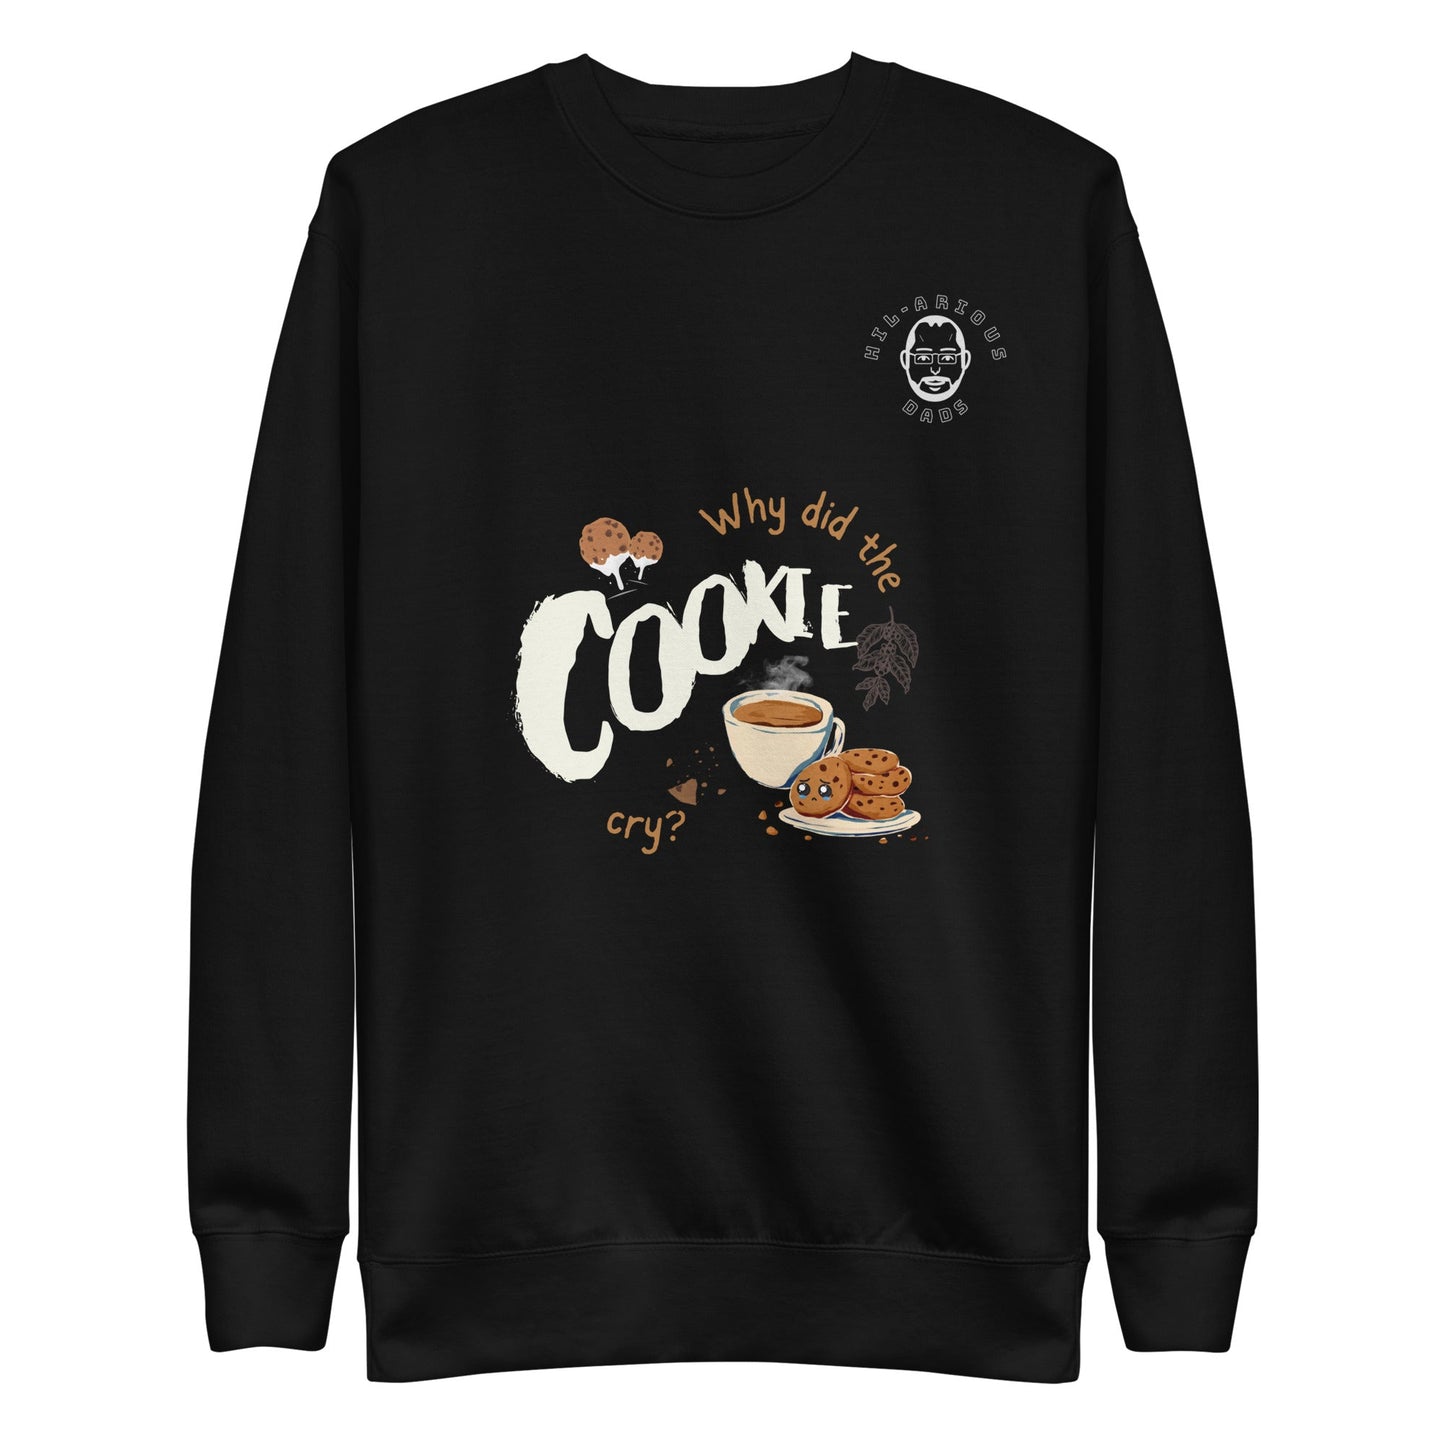 Why did the cookie cry?-Sweatshirt - Hil-arious Dads